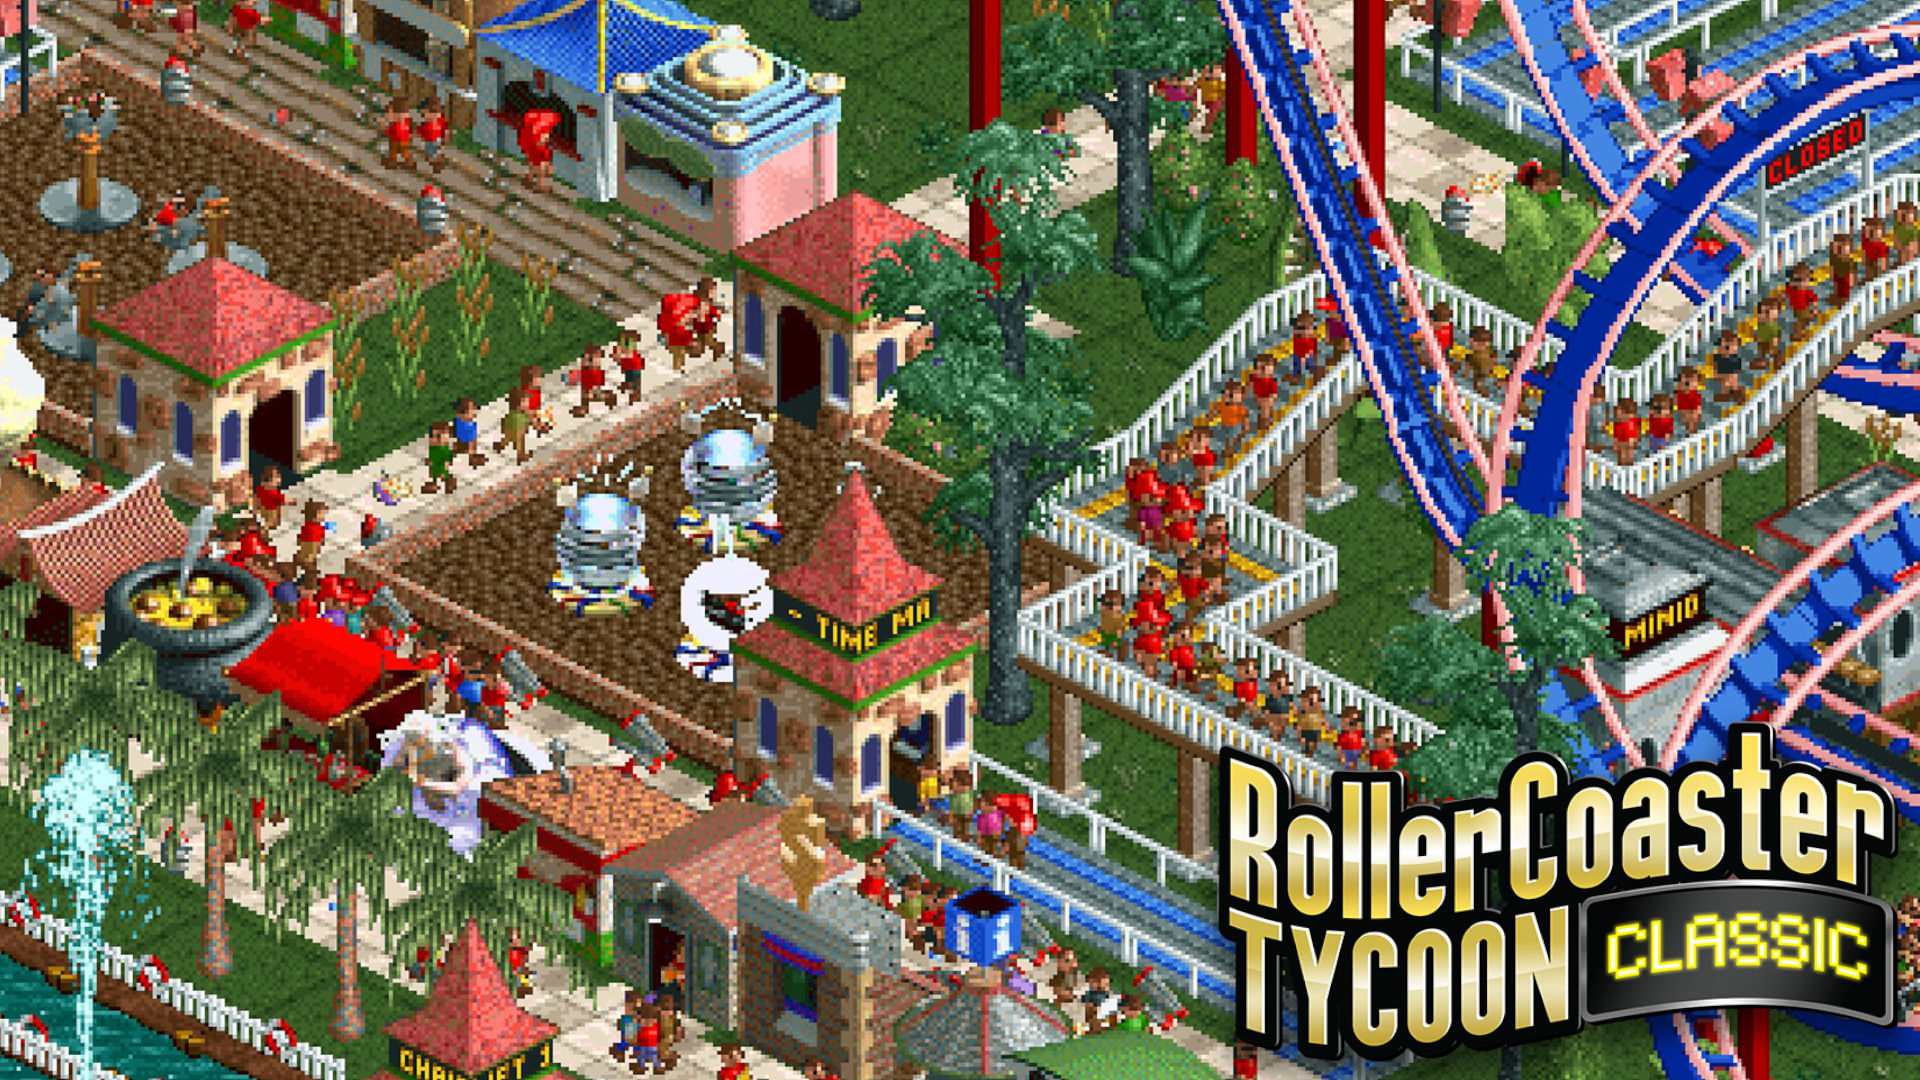 This RollerCoaster Tycoon ride takes 12 real-world years to complete